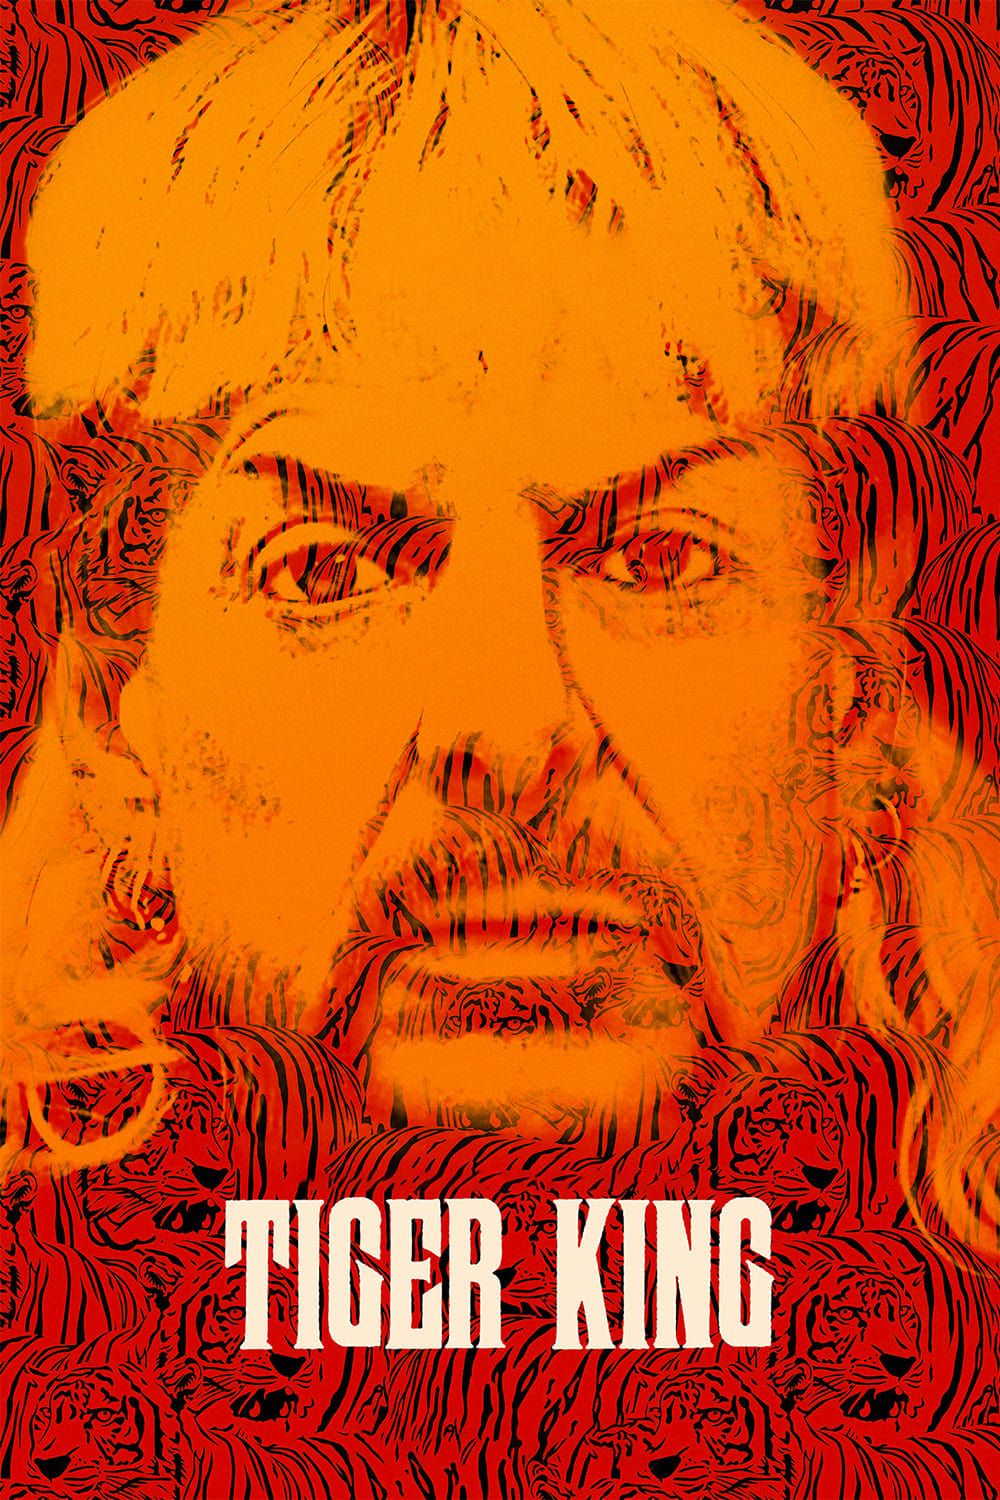 Tiger King: Murder, Mayhem and Madness (2020). The Poster